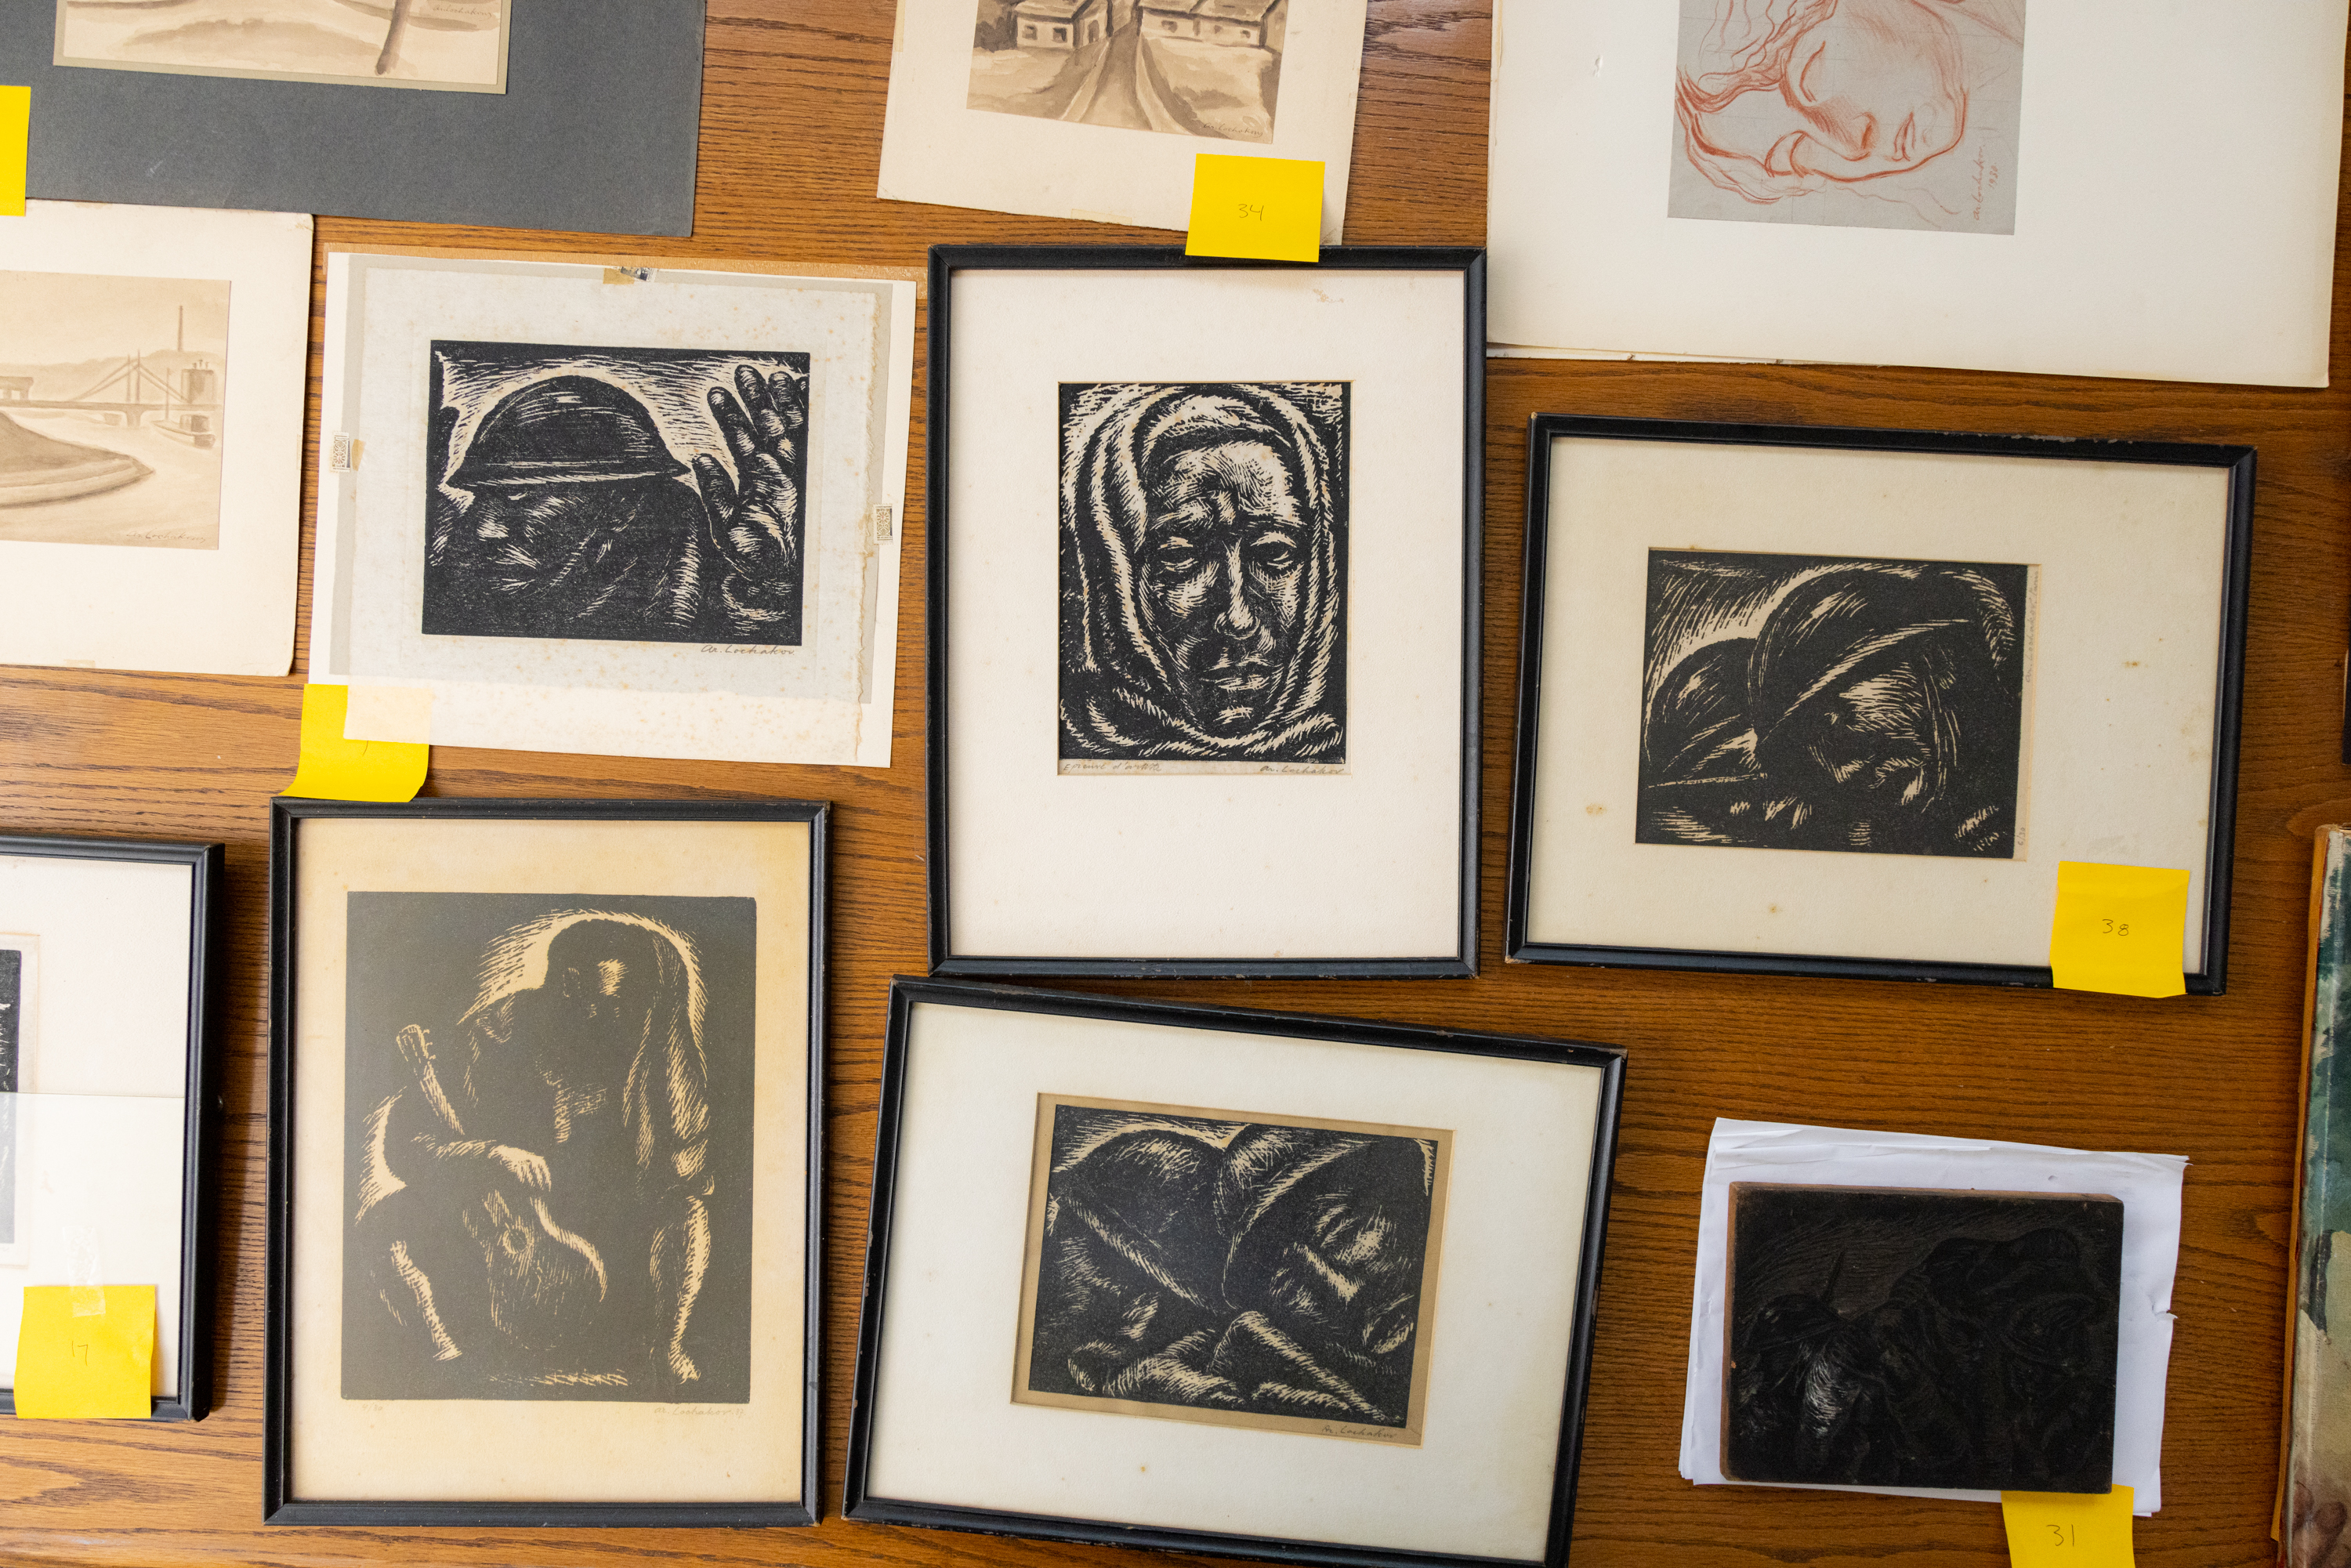 Collection of framed monochrome artworks displayed on wood, depicting various figures and abstract forms, with numbered labels.